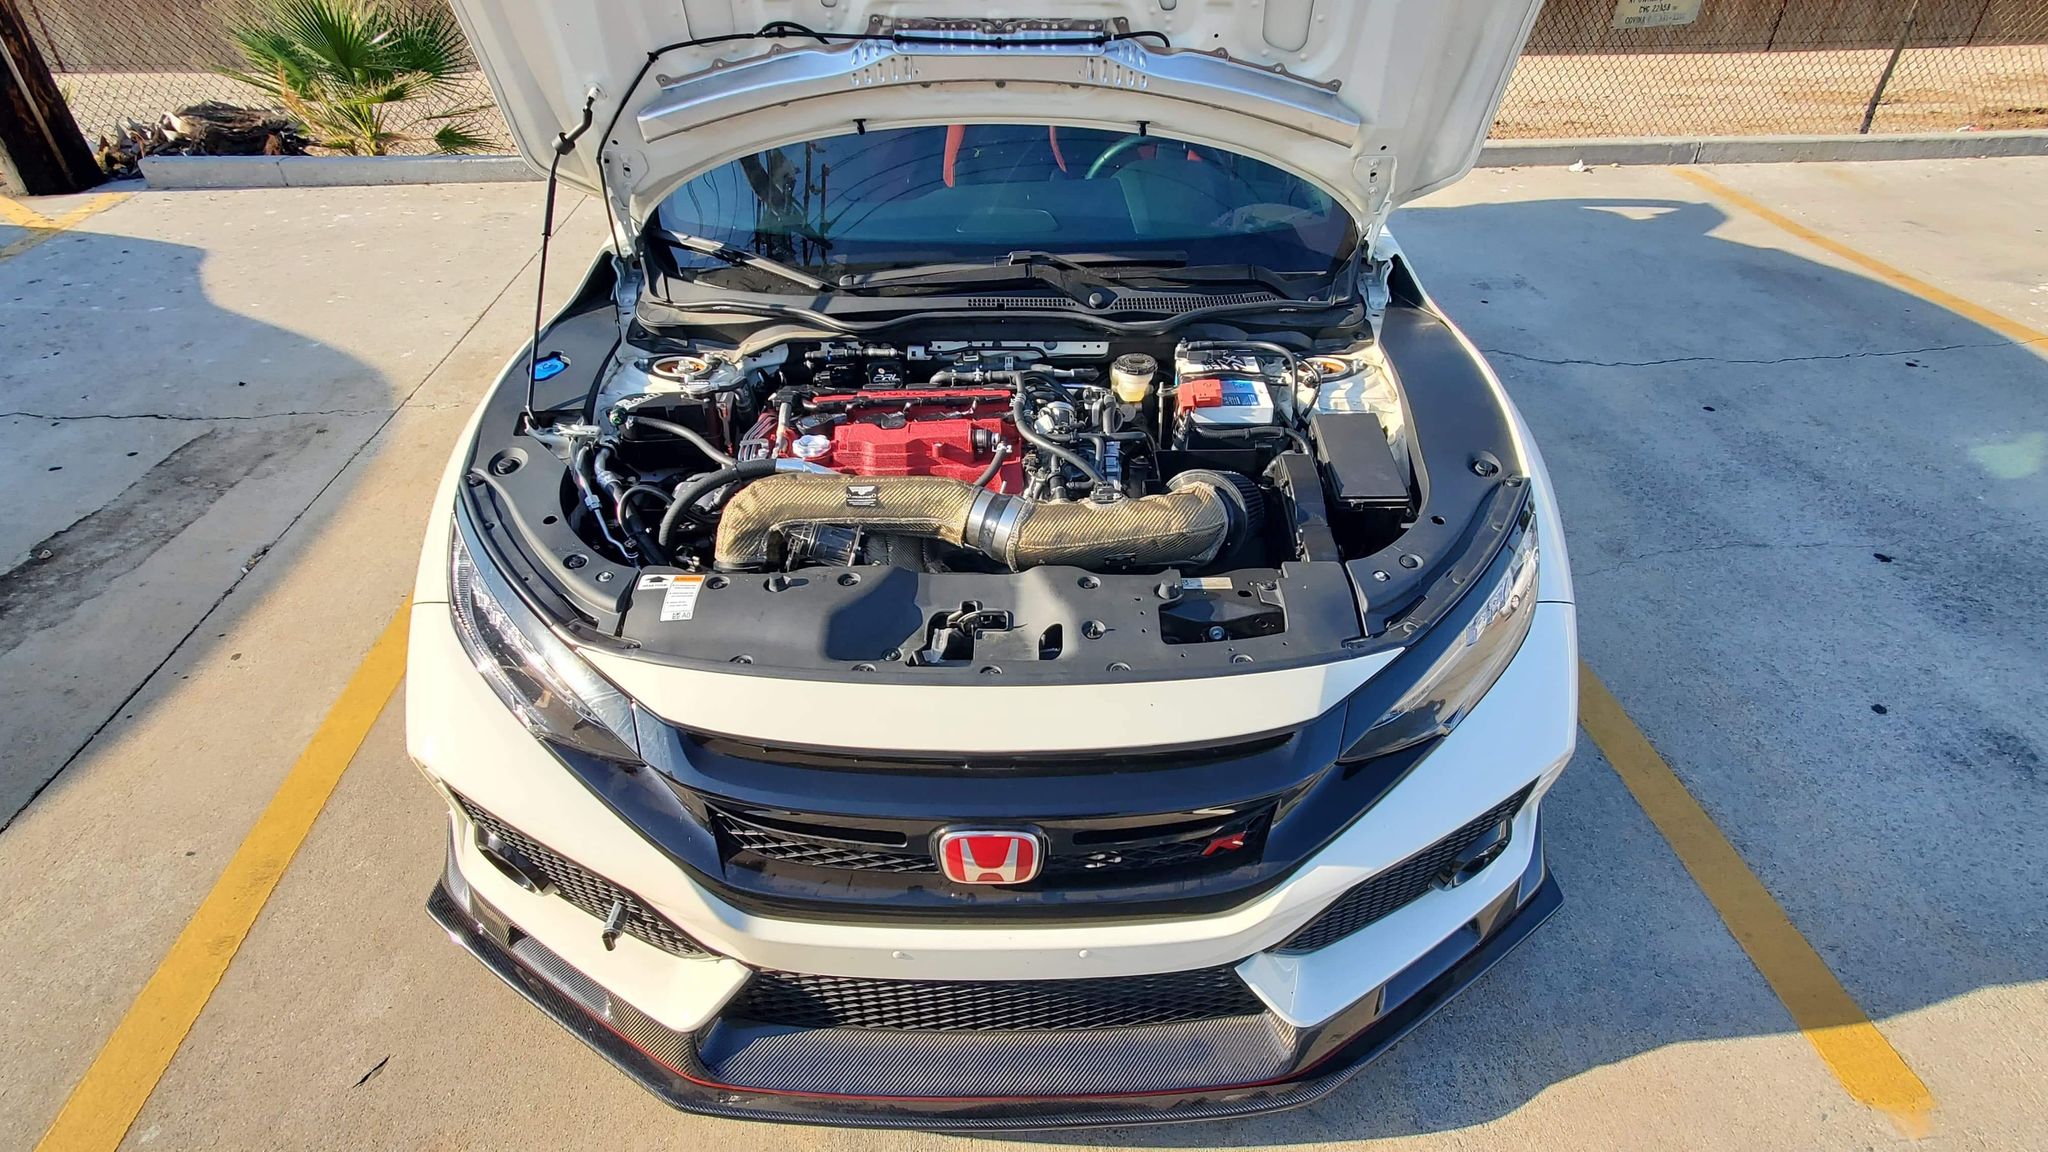 CTR G Series Turbo Kit and Full Bolt On Performance Parts For The FK8 Civic Type R